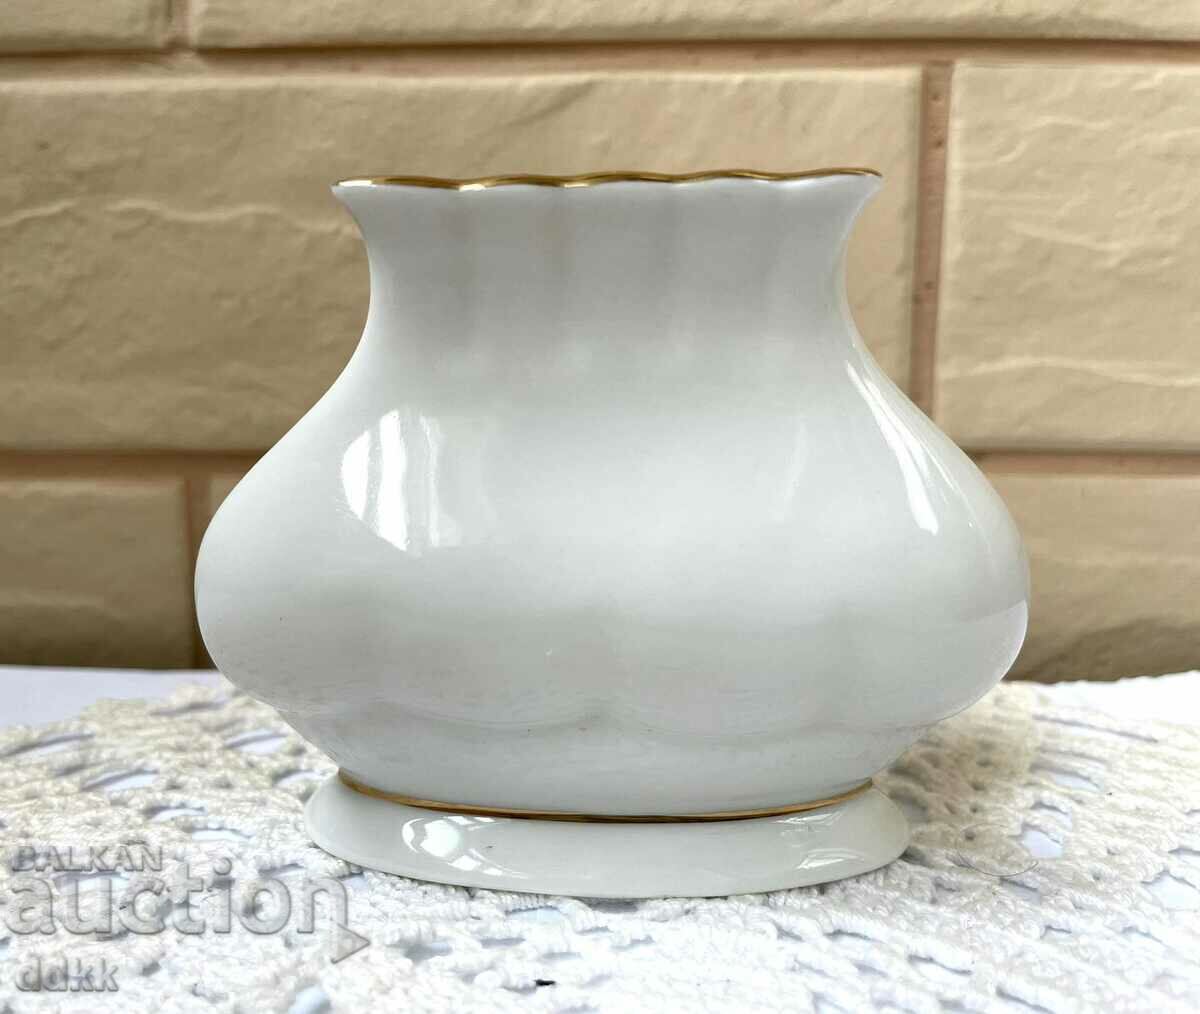 Beautiful porcelain napkin holder from Poland with gold edging